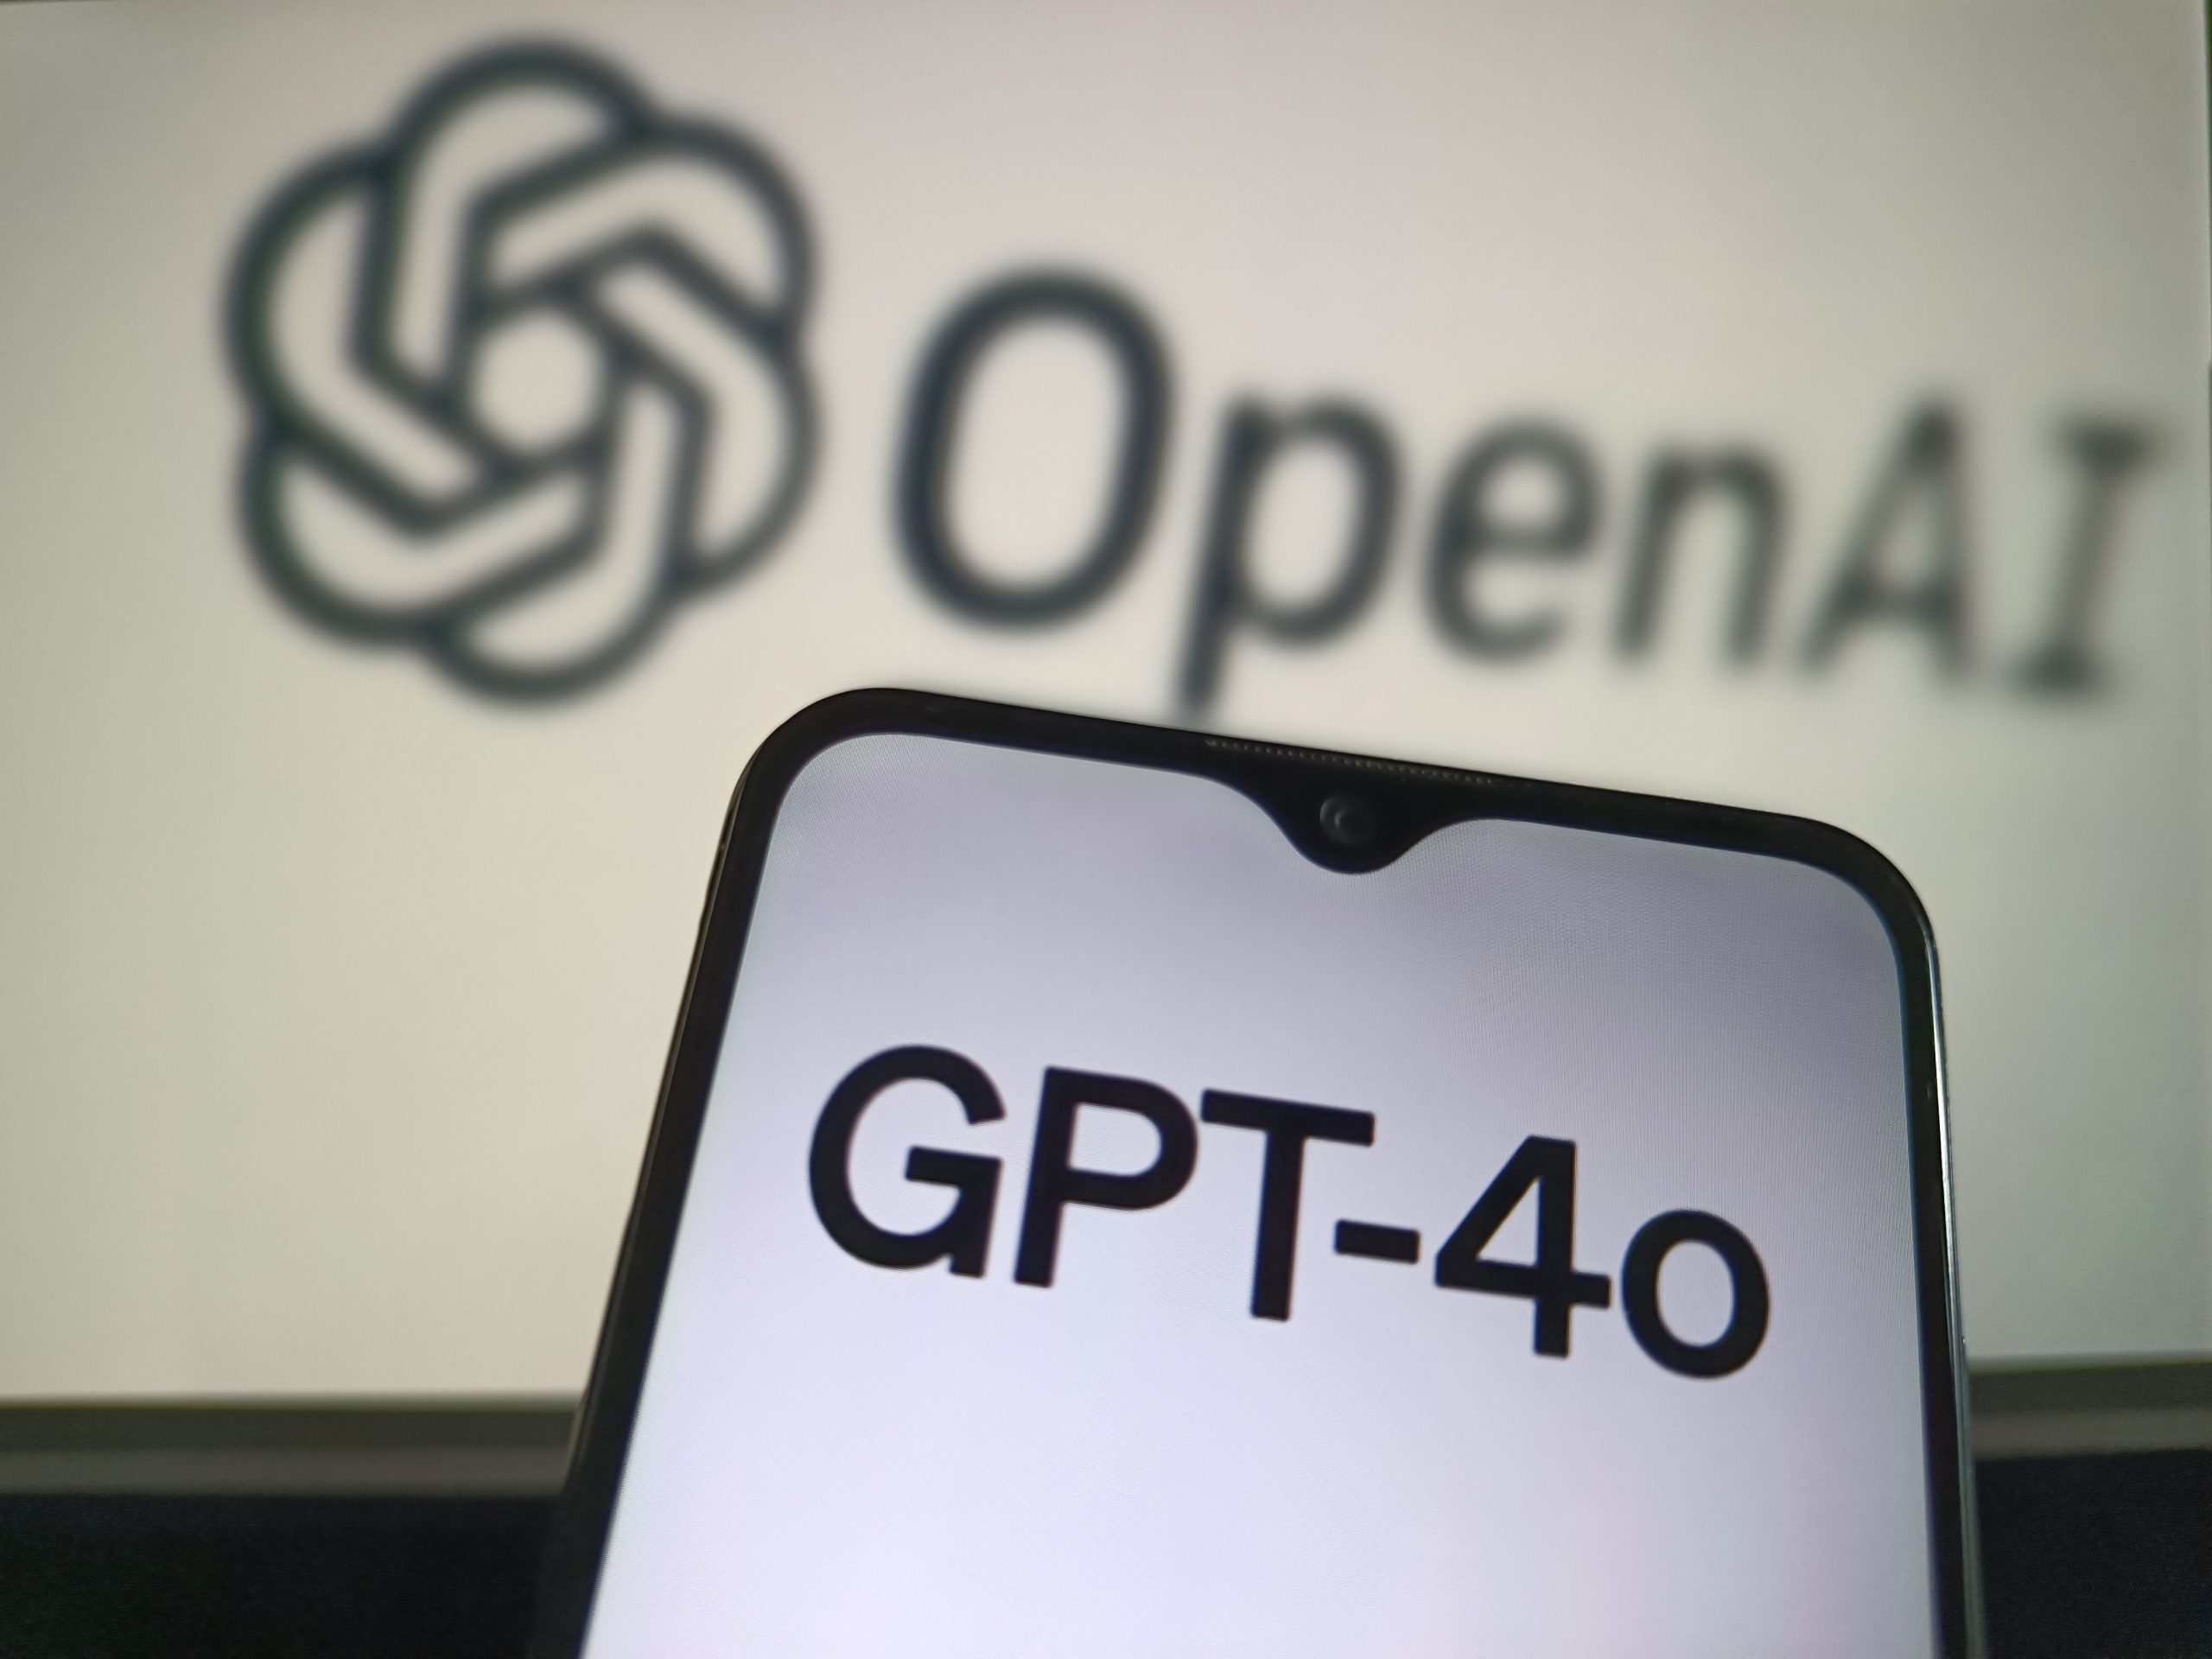 In this photo illustration, the sign of GPT-4o is seen